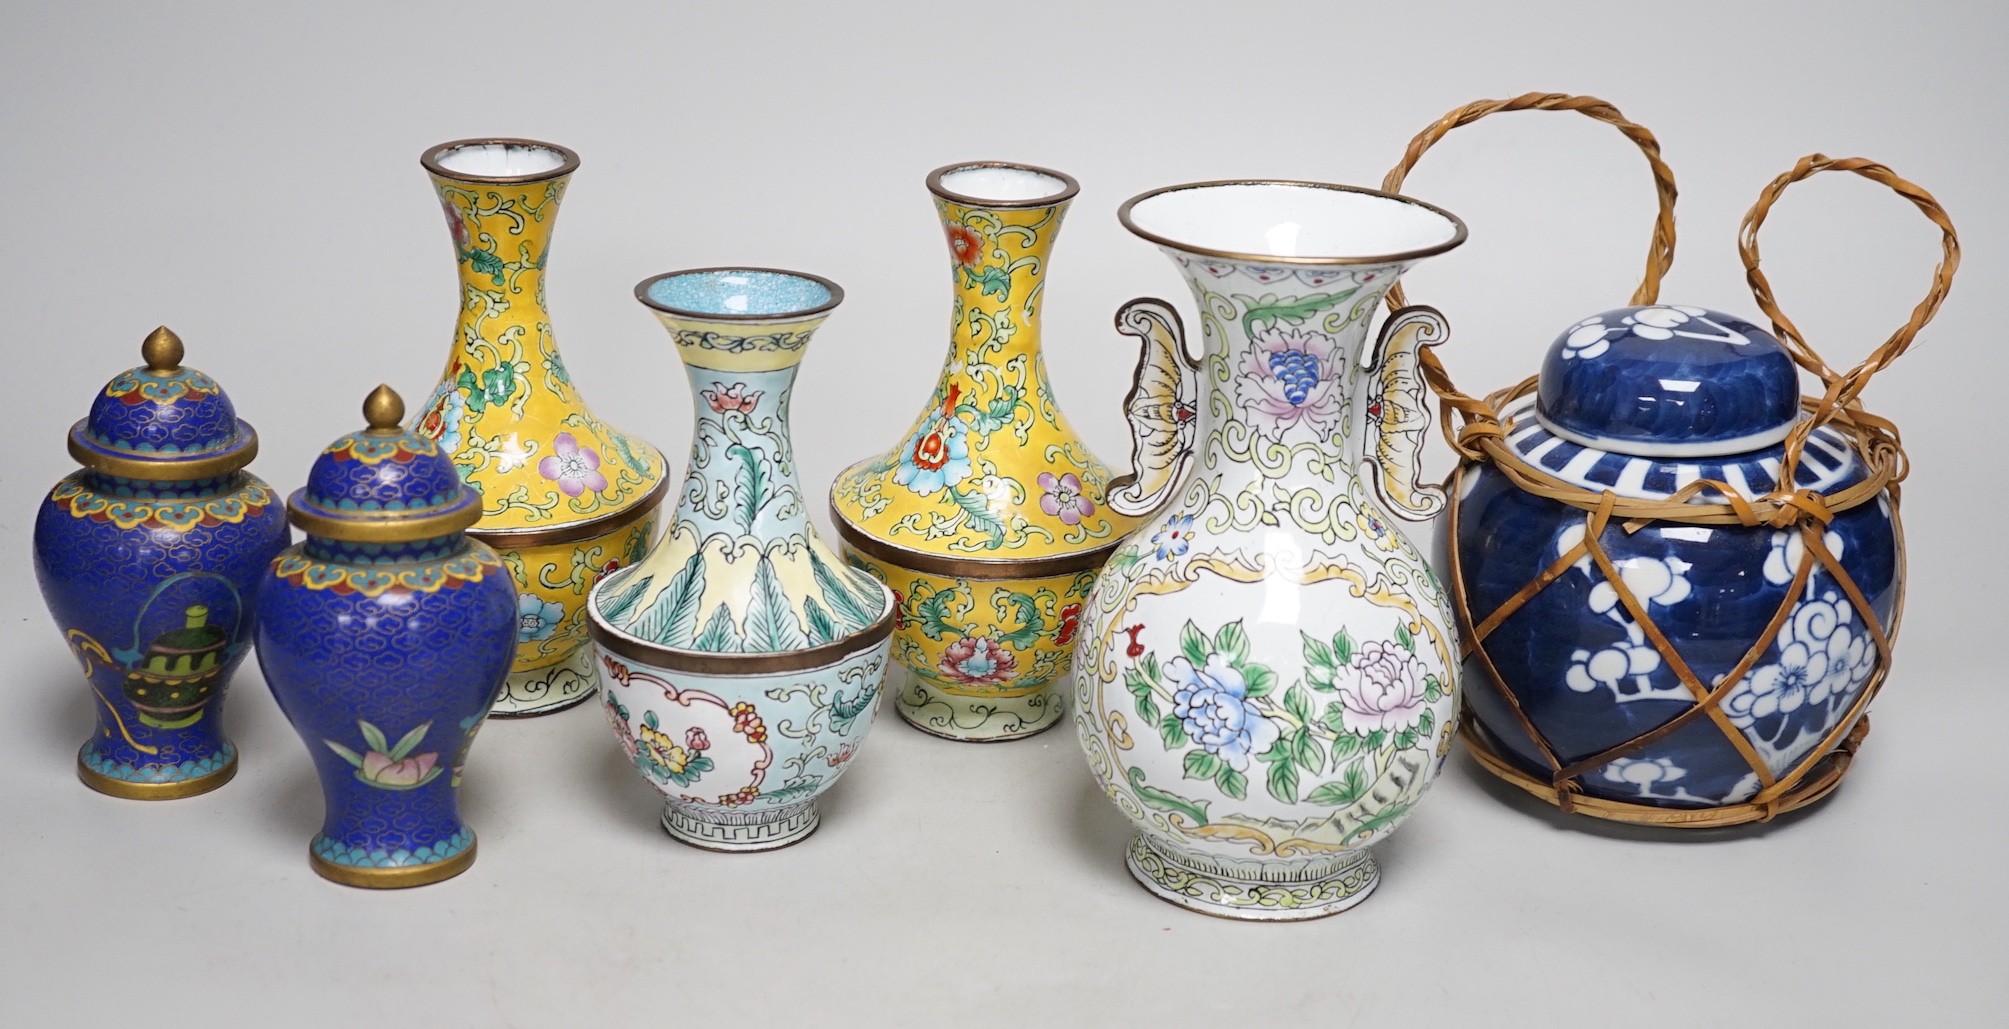 A group of Canton enamel vases, a pair of cloisonné enamel jars and a blue and white jar. Tallest 15.5cm